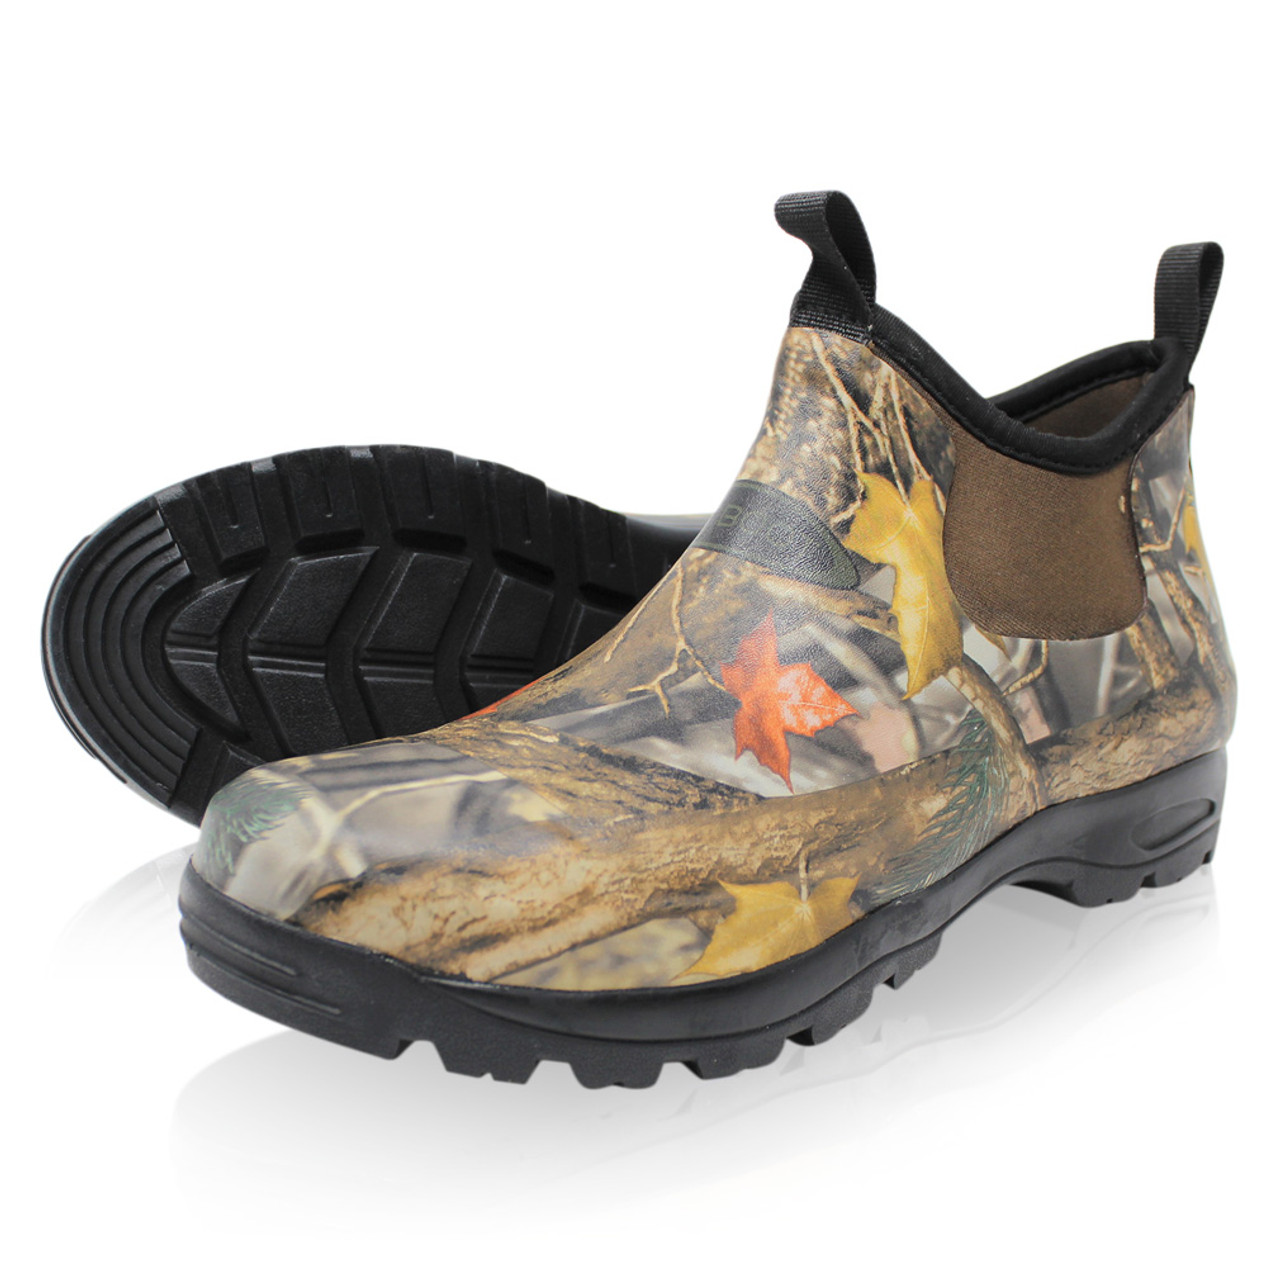 Dirt Boot Neoprene Waterproof Equestrian Pull-On Stable Muck Yard Boots Camo  - KOALA PRODUCTS FISHING TACKLE